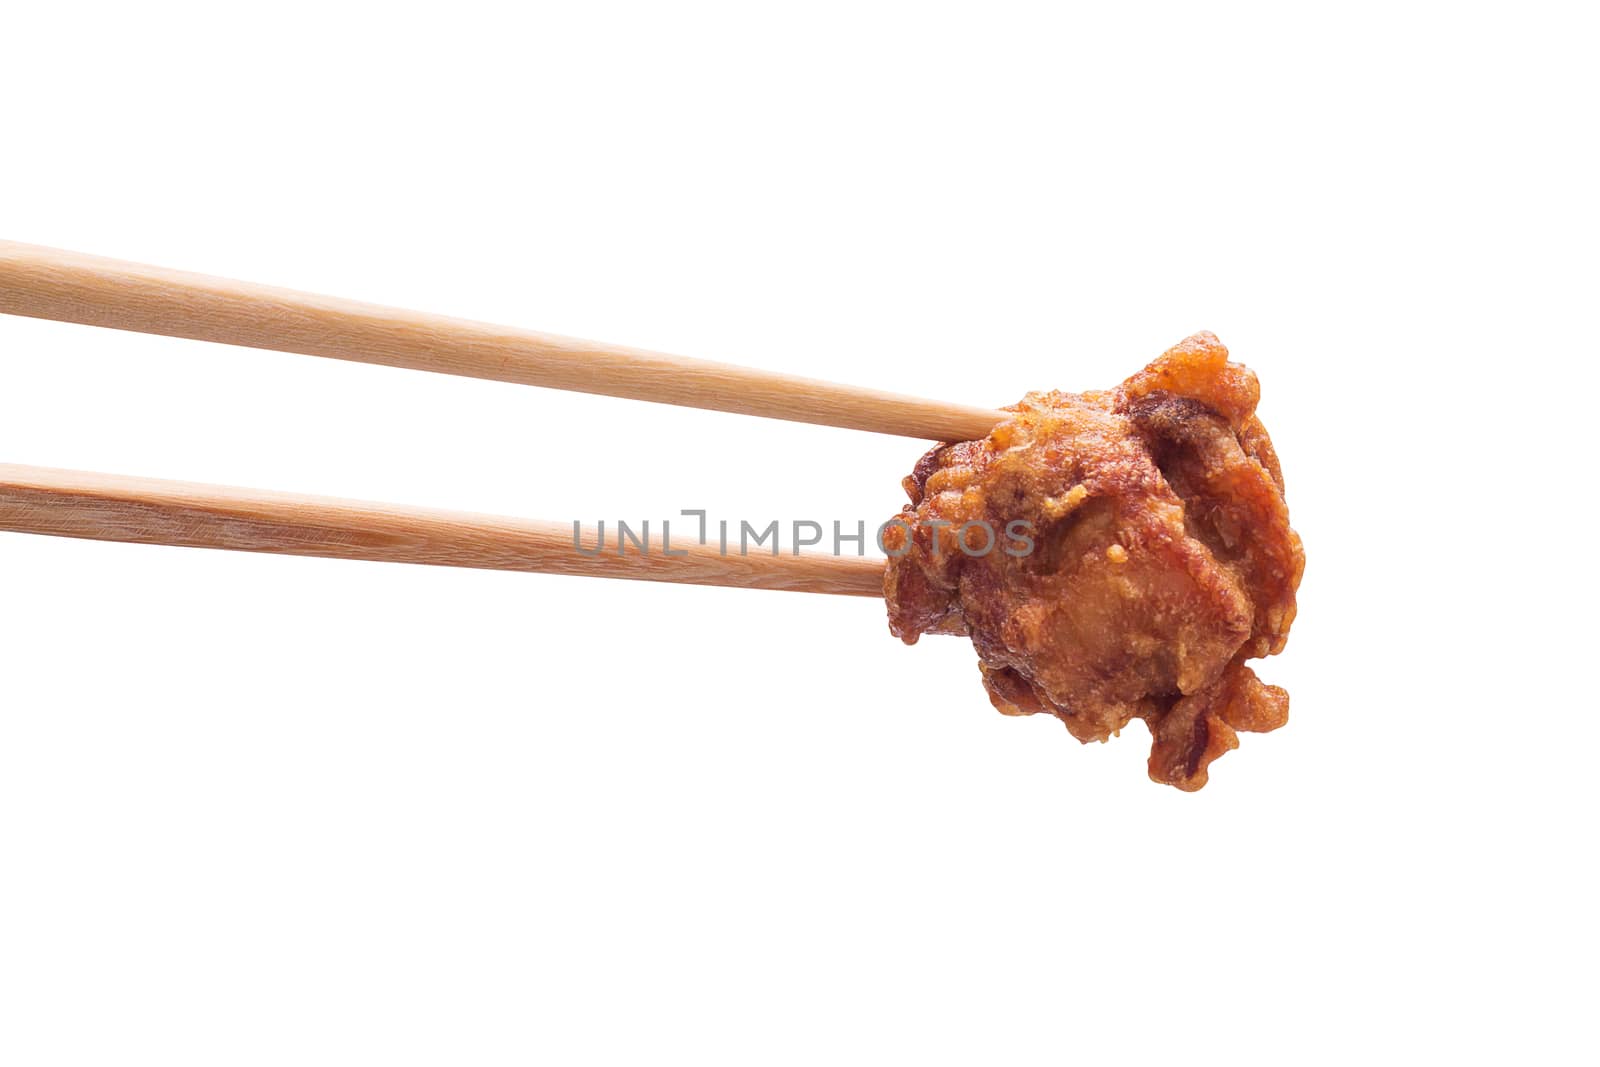 Isolate fried chicken meat, Japanese karaage and chopsticks on white background